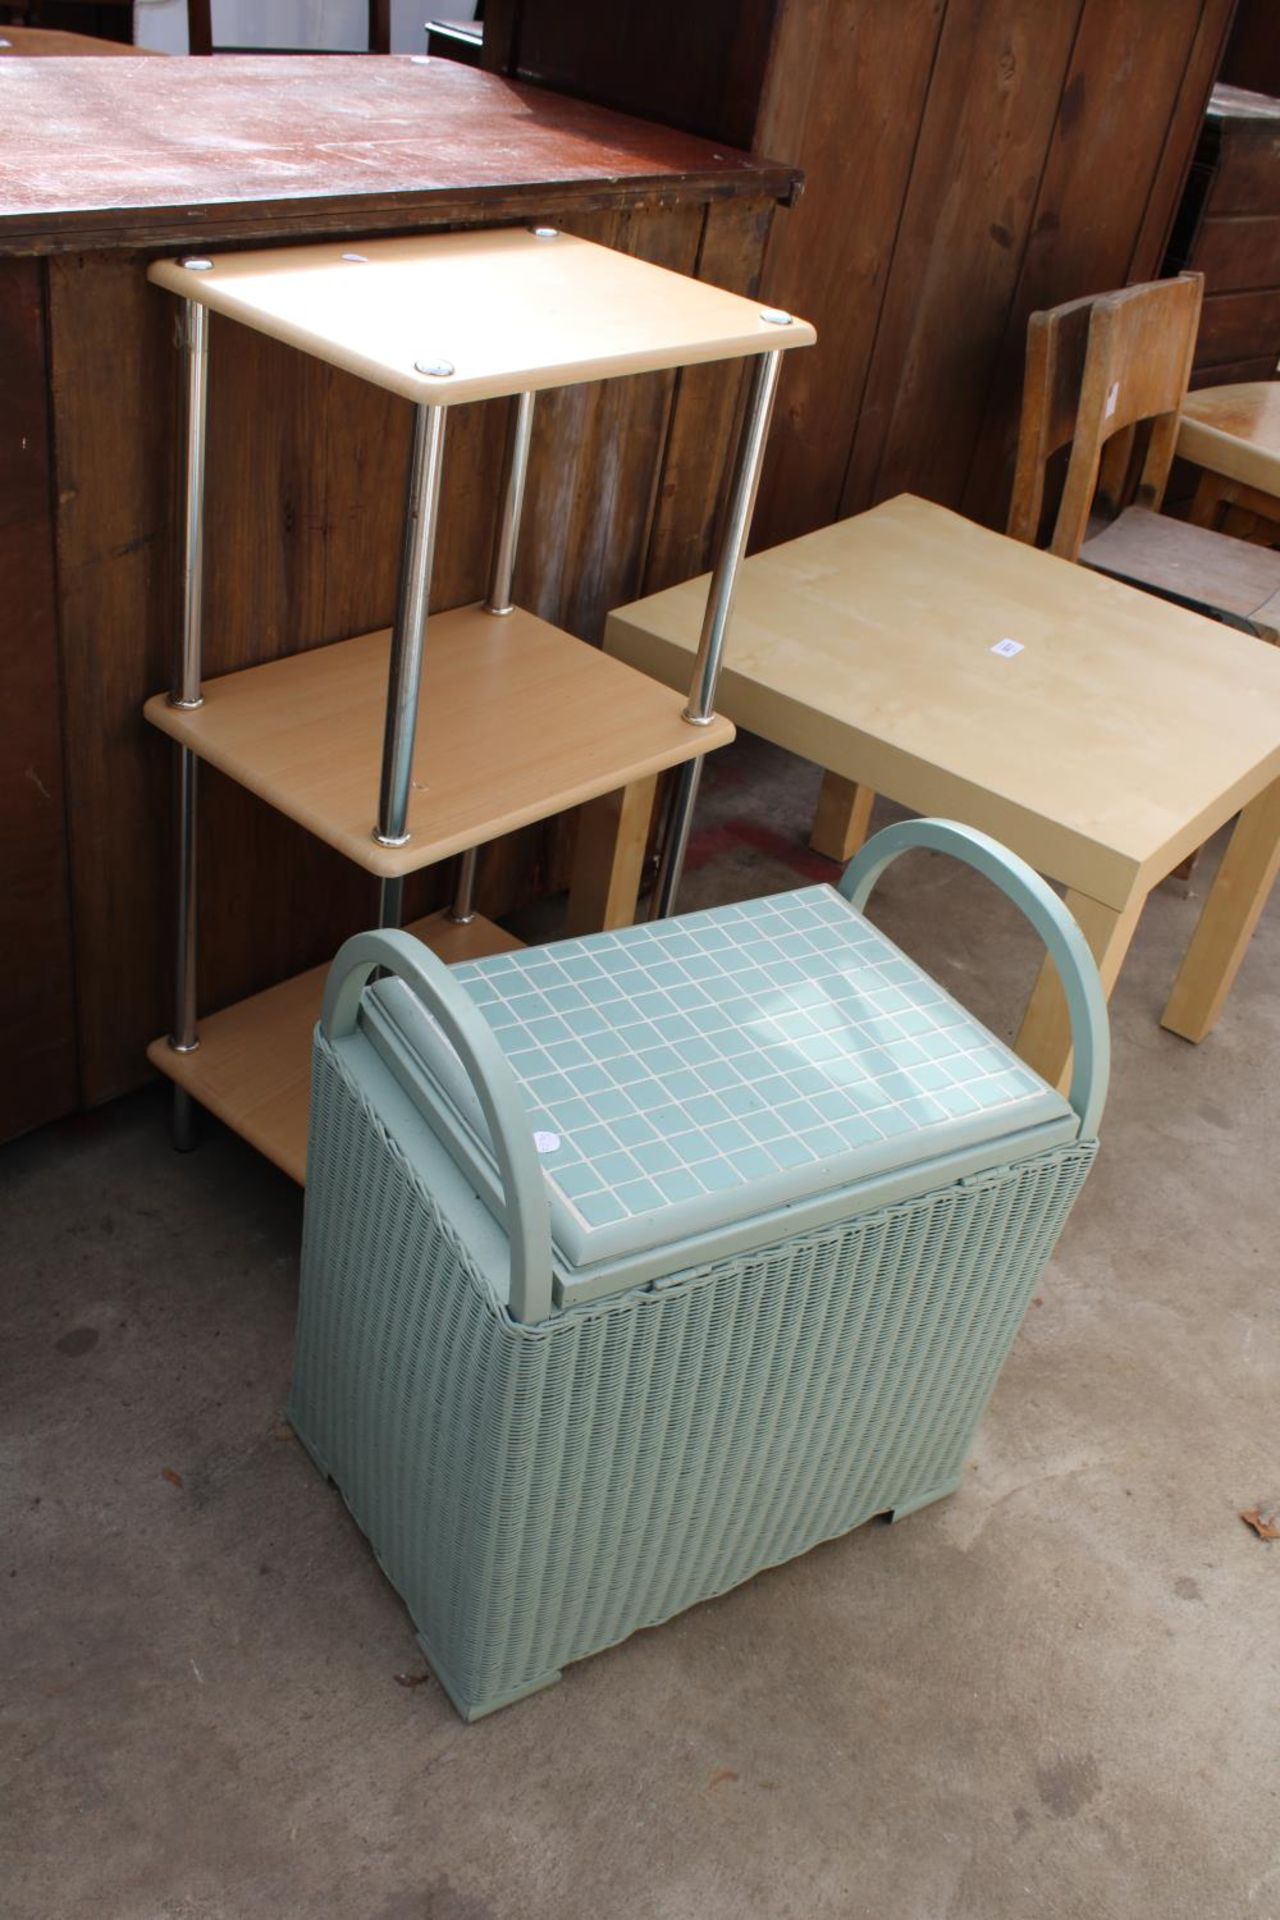 A LLOYD LOOM BOX STOOL, LAMP TABLE AND 3 TIER OPEN DISPLAY UNIT - Image 2 of 2